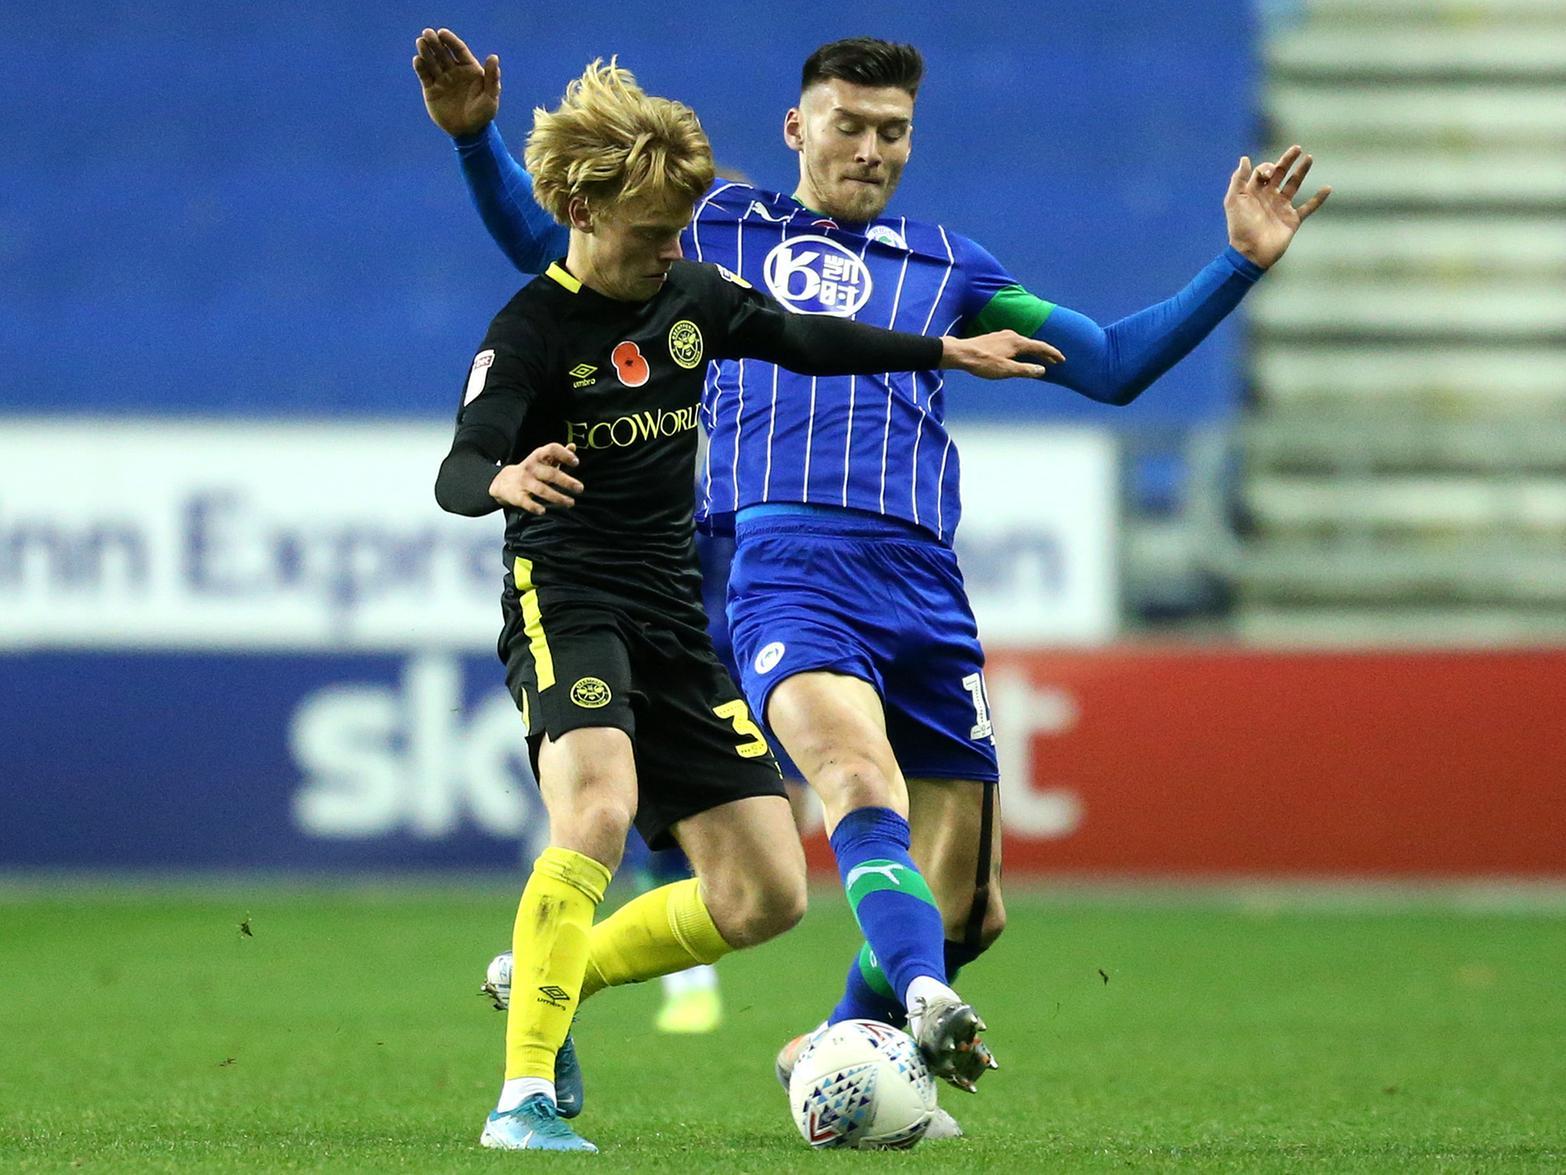 Moore earned his first-ever Championship brace as Wigan Athletic earned a 2-2 draw with Cardiff City.